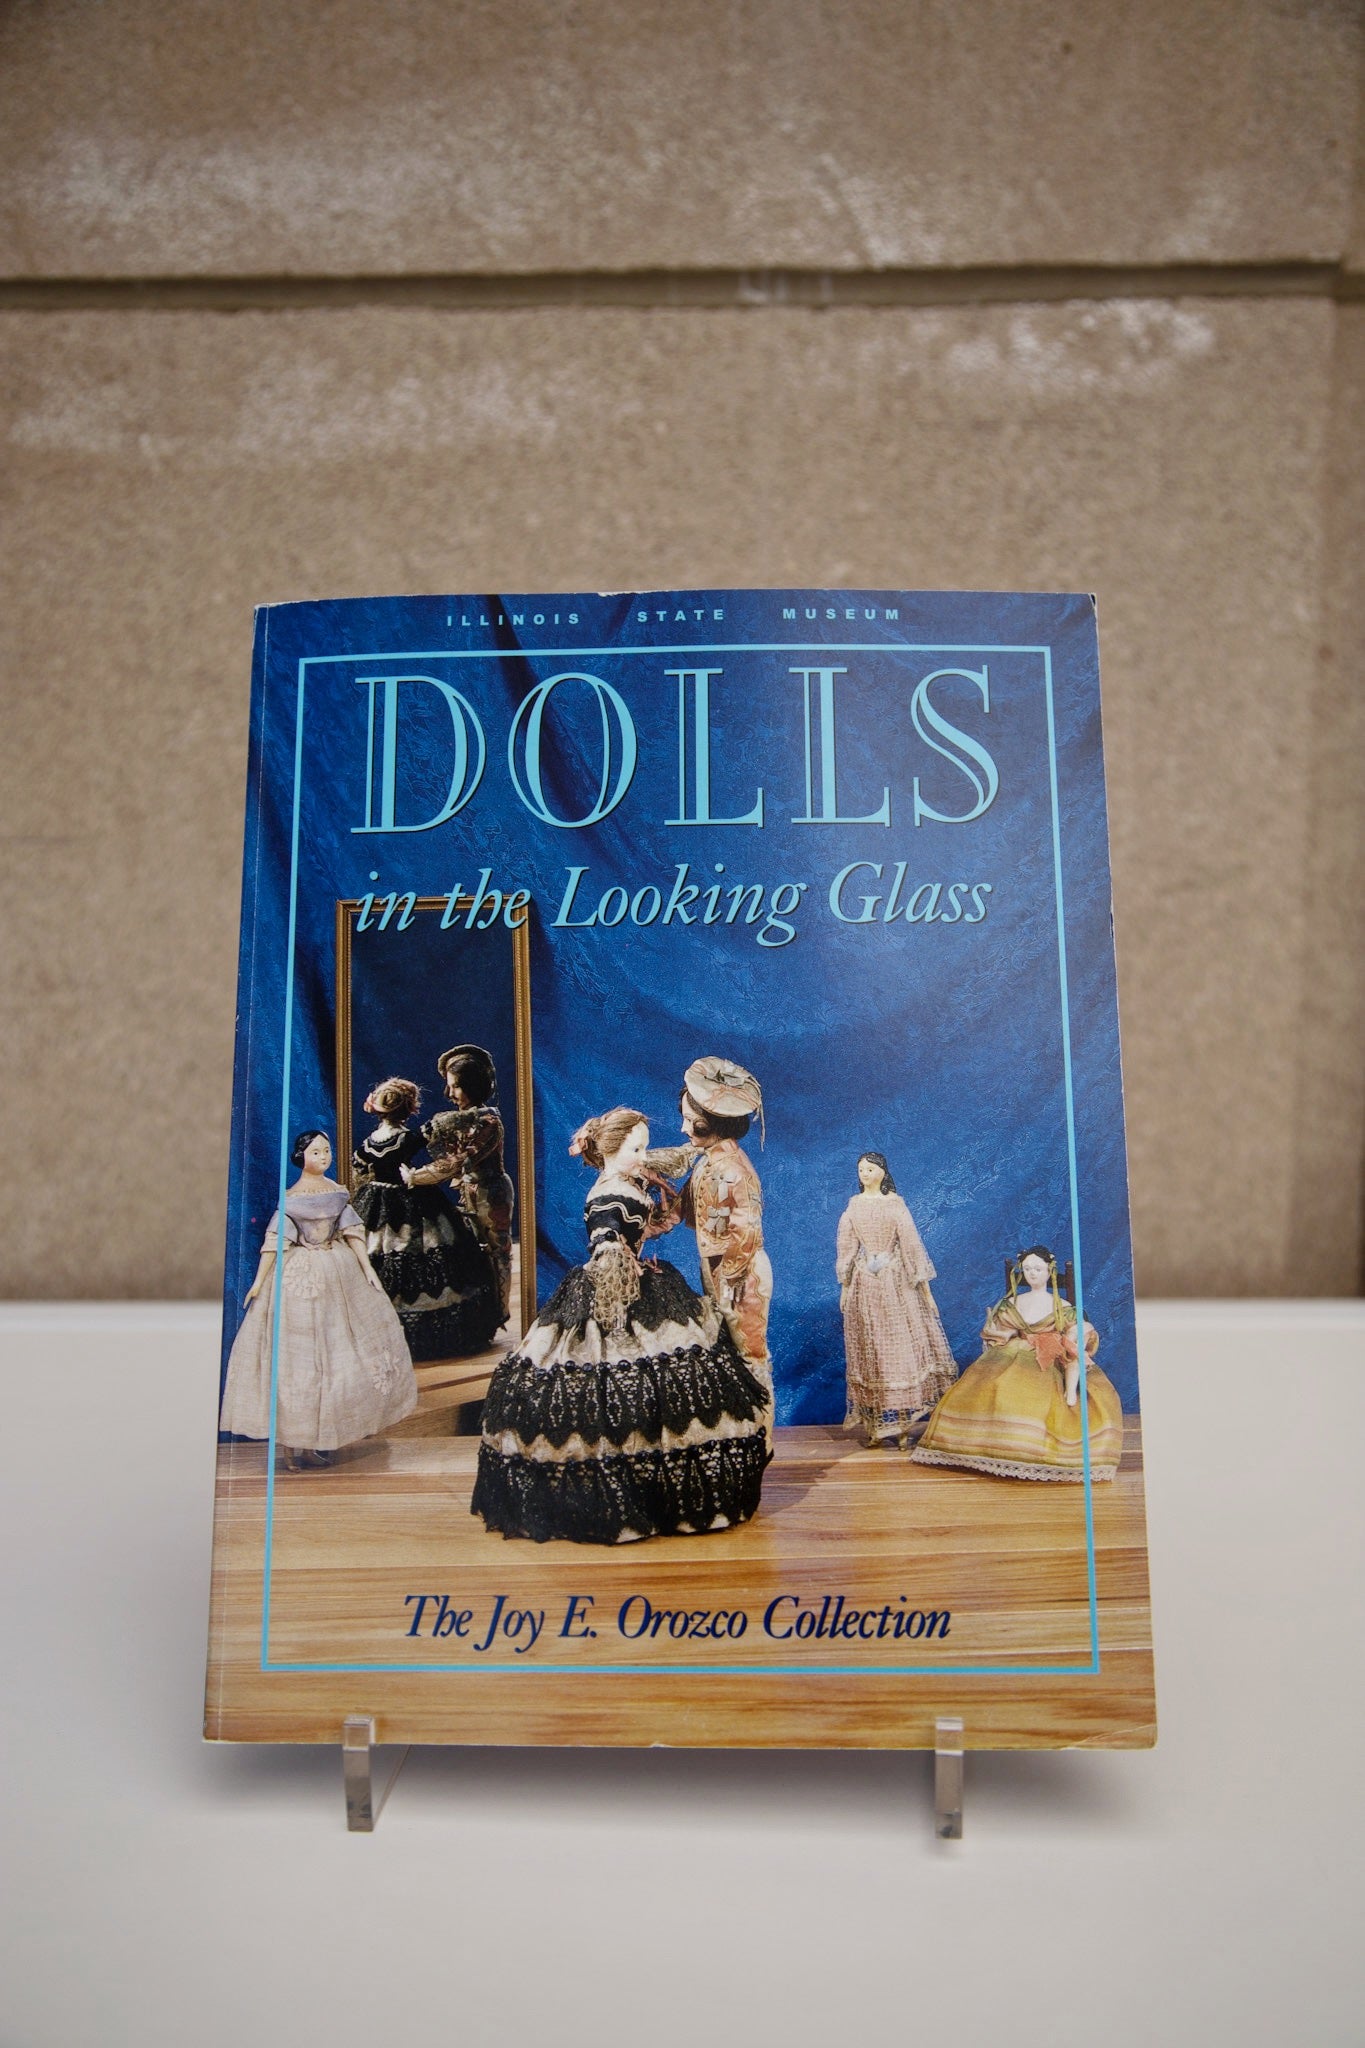 Photo of the cover of the book “Dolls in the Looking Glass: The Joy E. Orozco Collection”